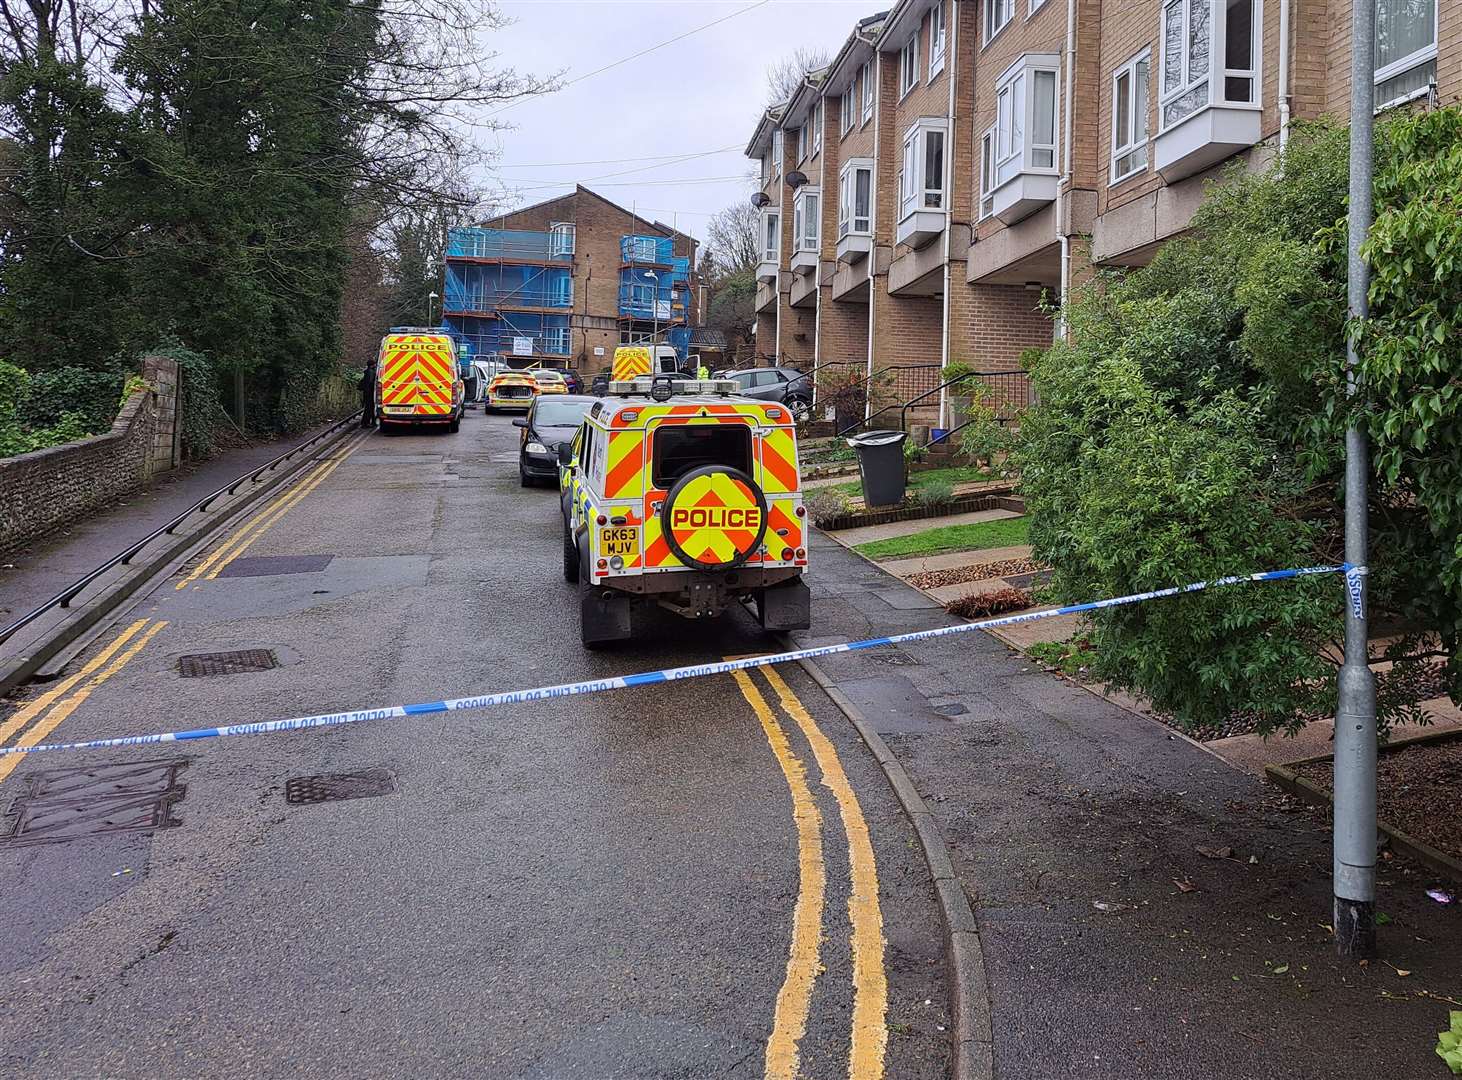 Some nine police vehicles were spotted at Anstee Road, in Dover, after Derek O’Hare was found dead in December